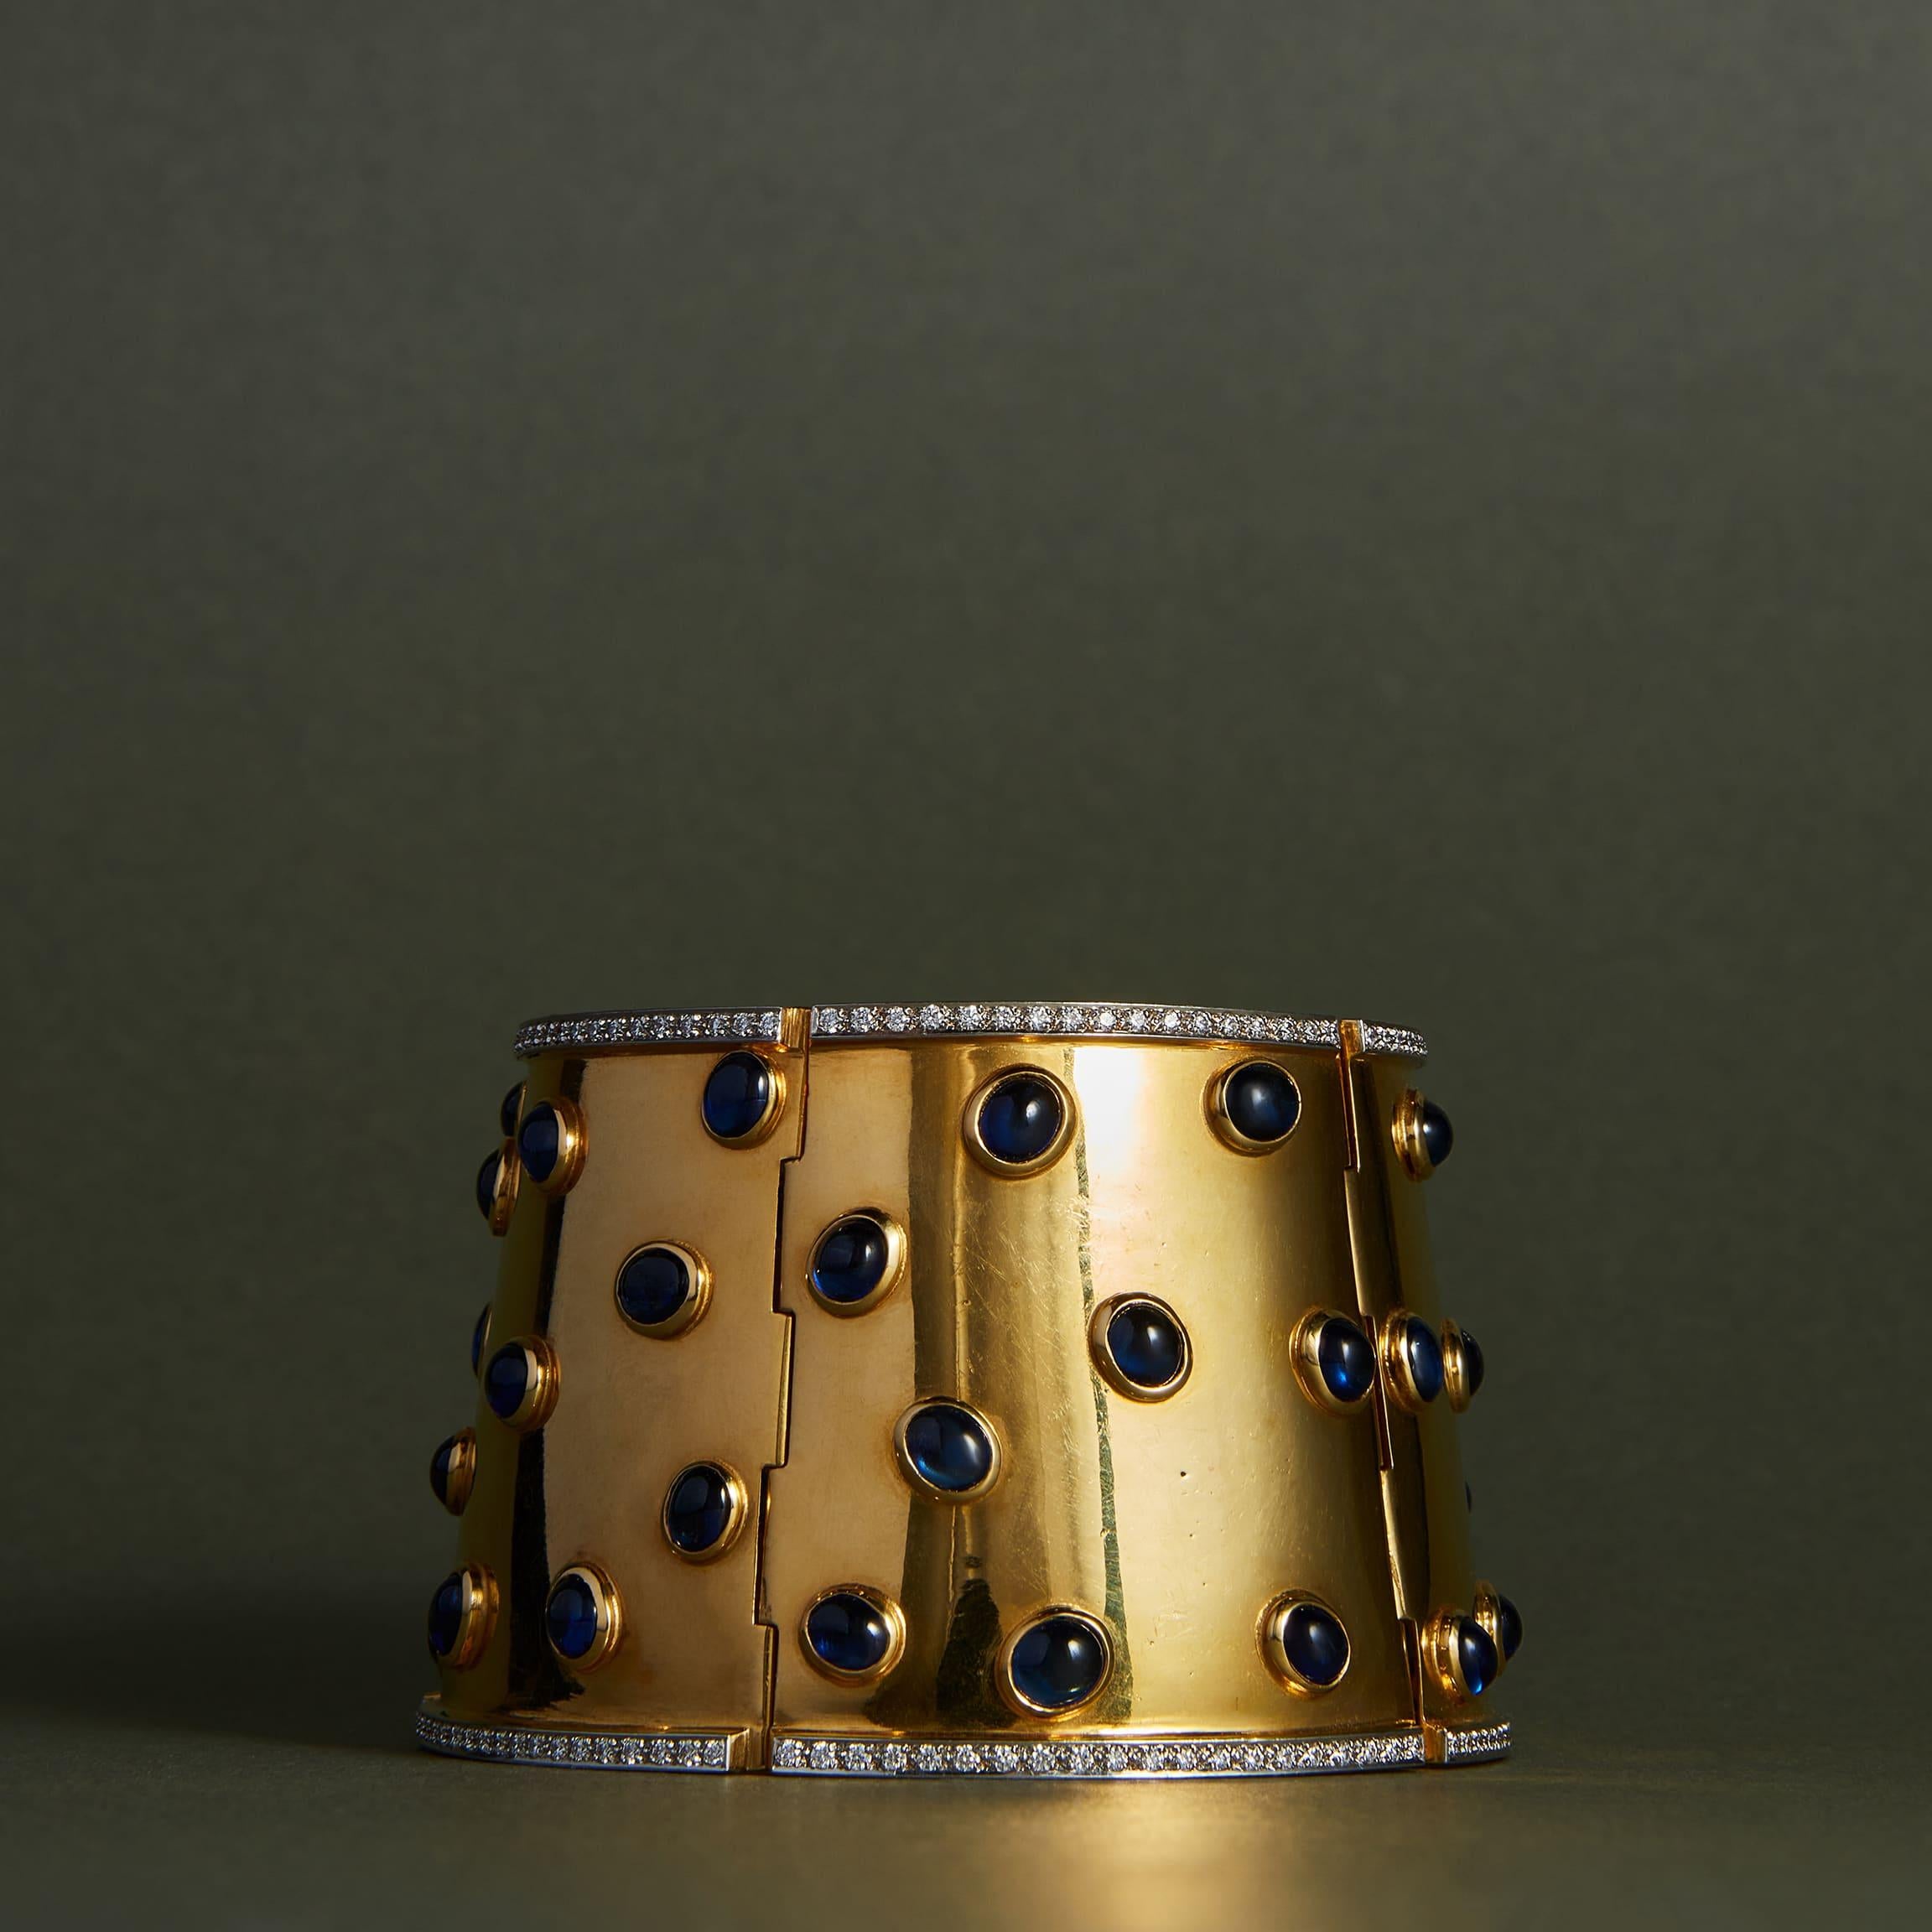 The ultimate statement jewel. This wide-hinged cuff bracelet of polished 18k yellow gold and platinum is set with cabochon sapphires, within edges embellished with lines of brilliant-cut diamonds.
Wide cuff bracelets are empowering jewels - sensual